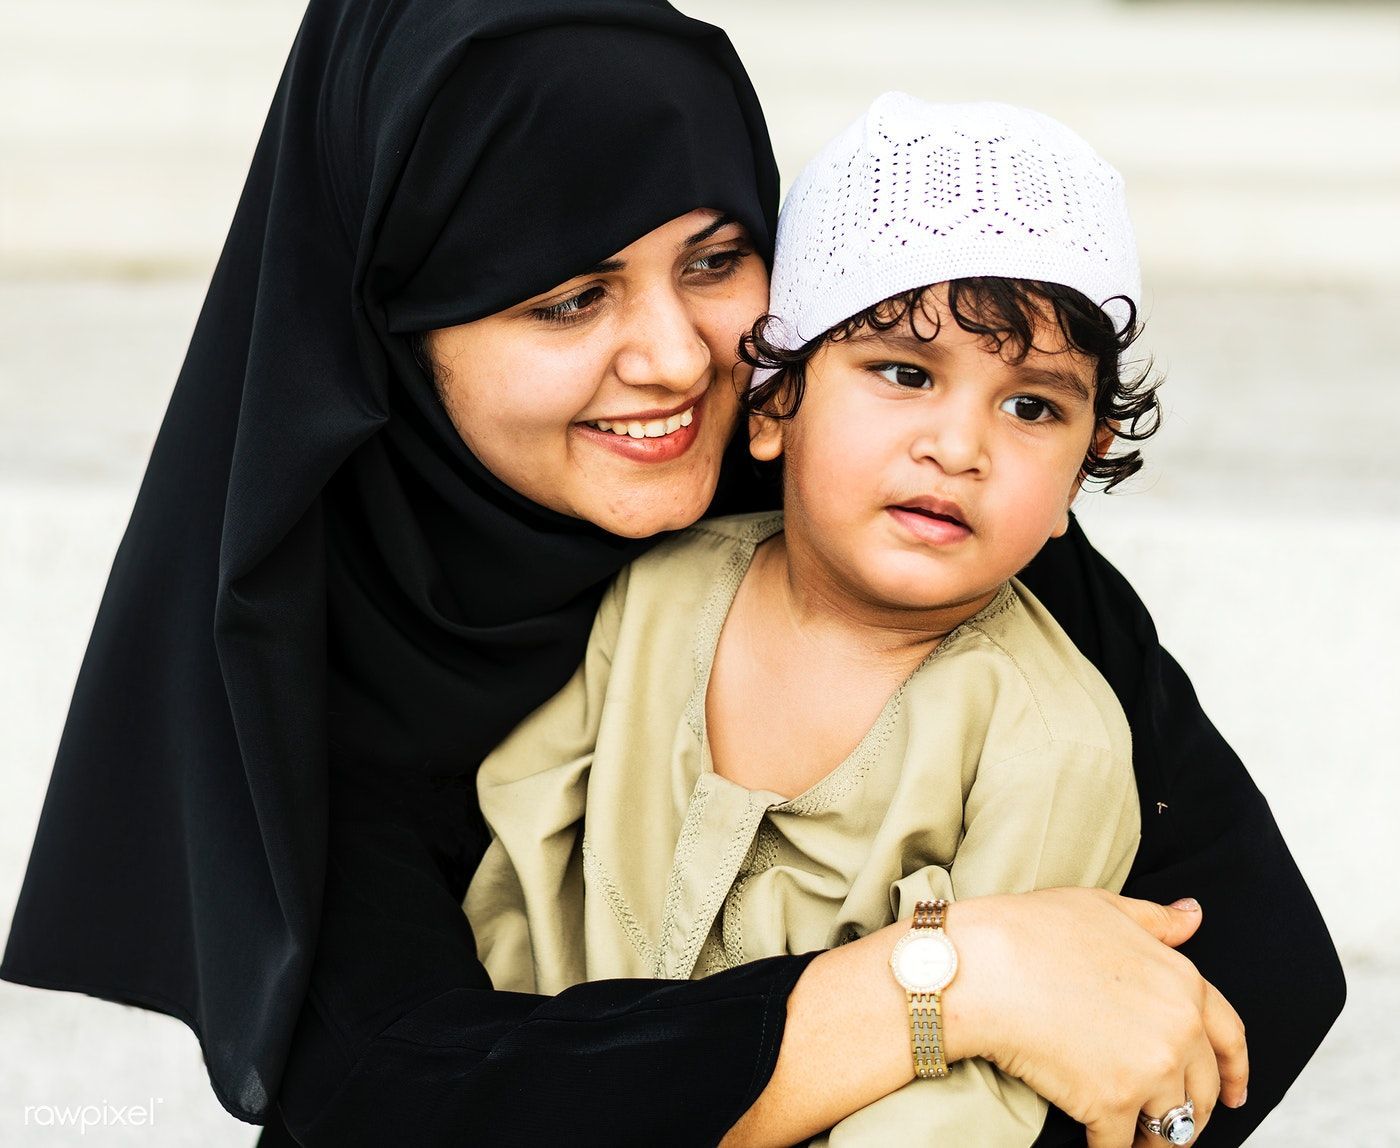 Download premium image of Muslim mother and her son 425667. Lifestyle photography family, Muslim family, Large family photography